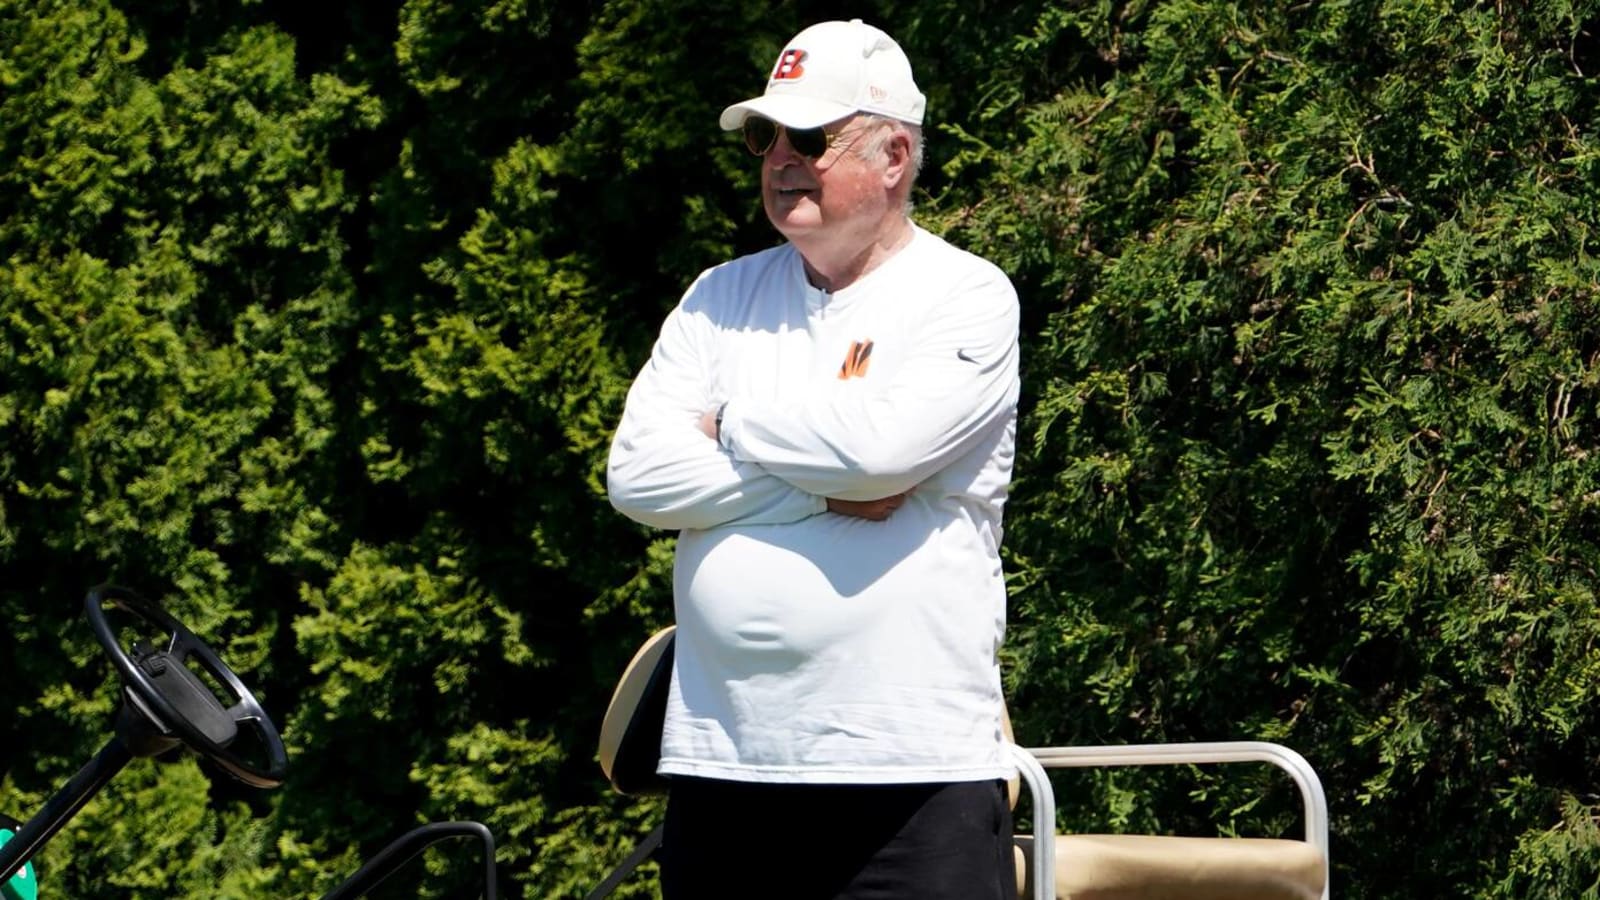 Bengals owner: 'Challenge' to keep offensive core together